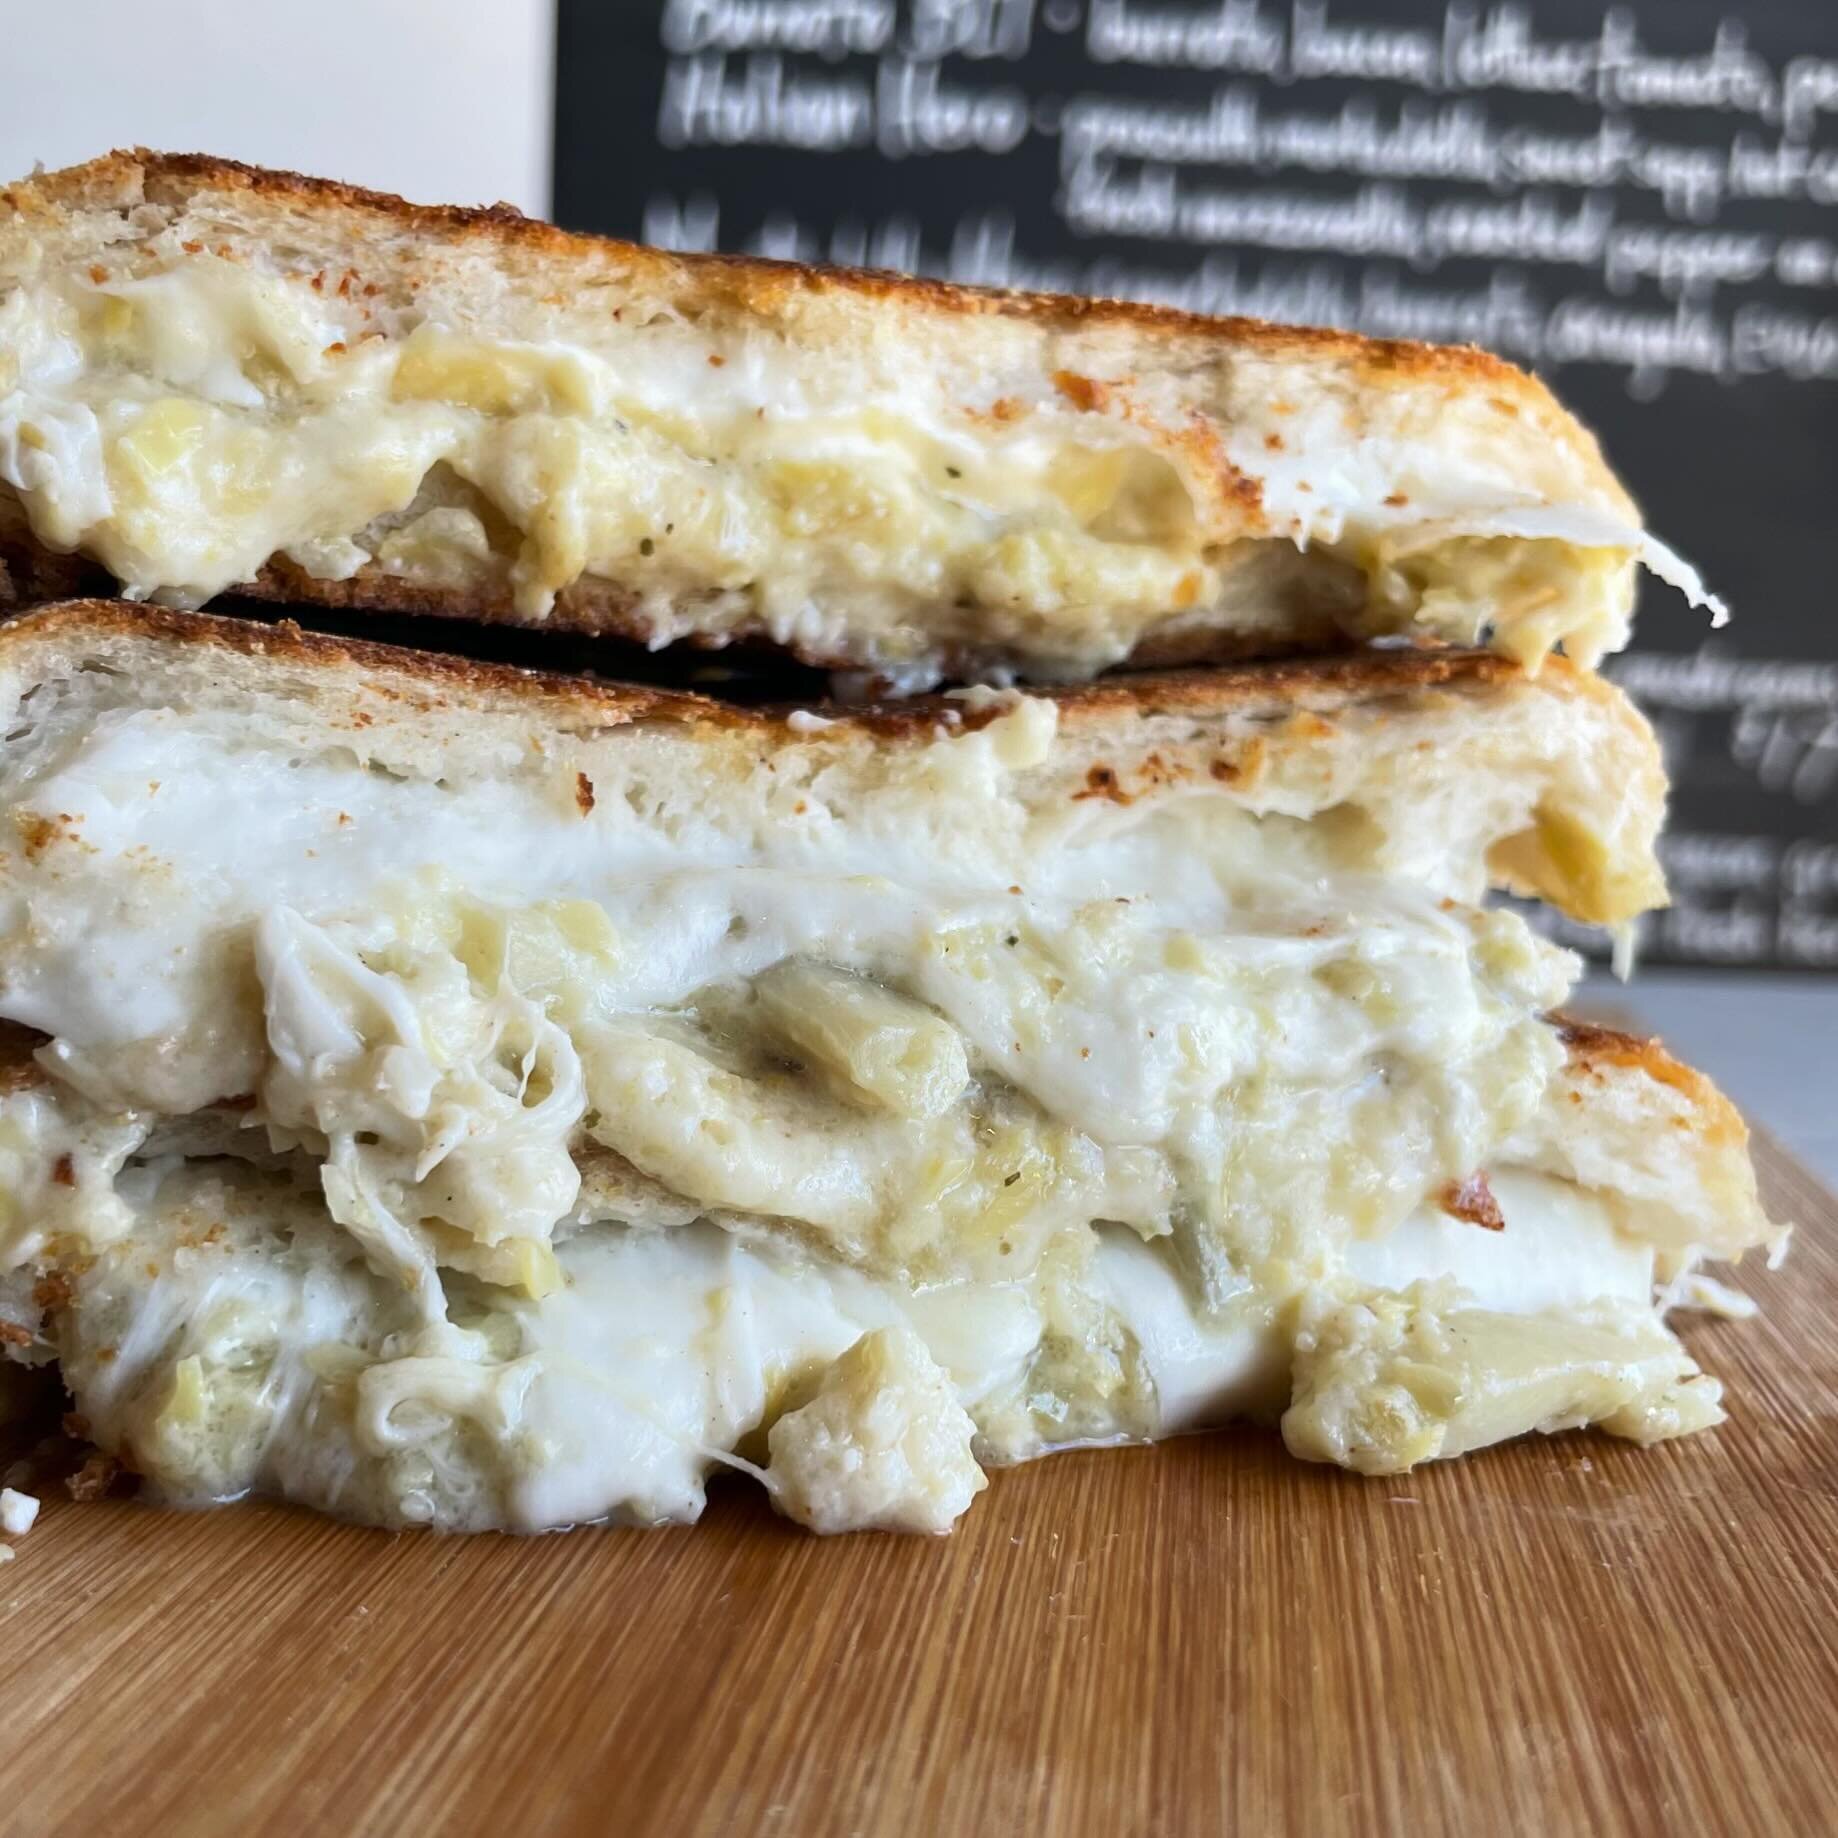 New weekend special! 
Our housemade artichoke dip, pureed artichoke, and fresh mozzarella hot pressed on fresh ciabatta 

#meatless #lent #lunch #eats